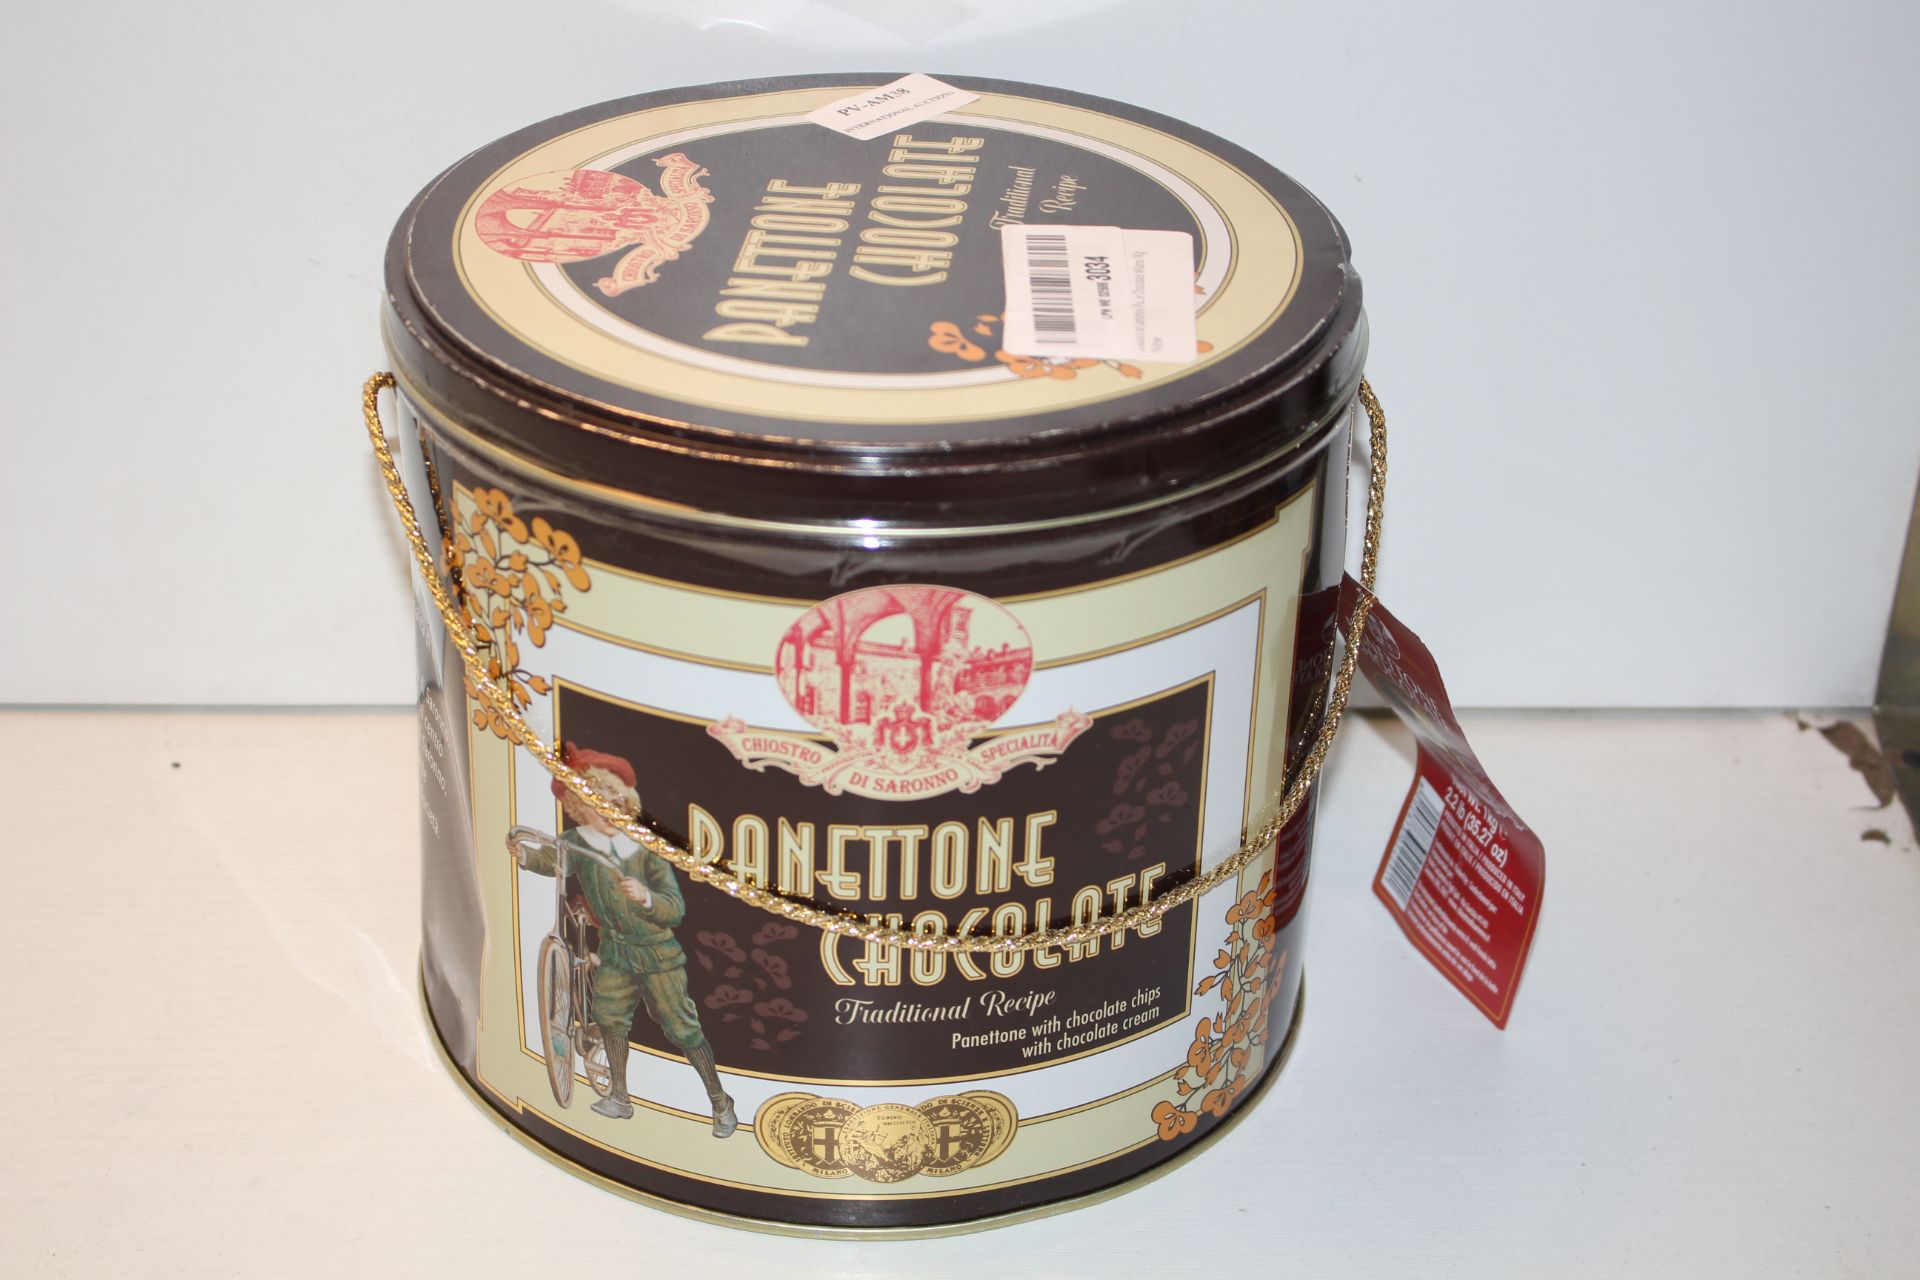 BOXED PANNETONE CHOCOLATE TRADITIONAL RECIPE PANETTONE WITH CHOCOLATE CHIPS WITH CHOCOLATE CREAM (